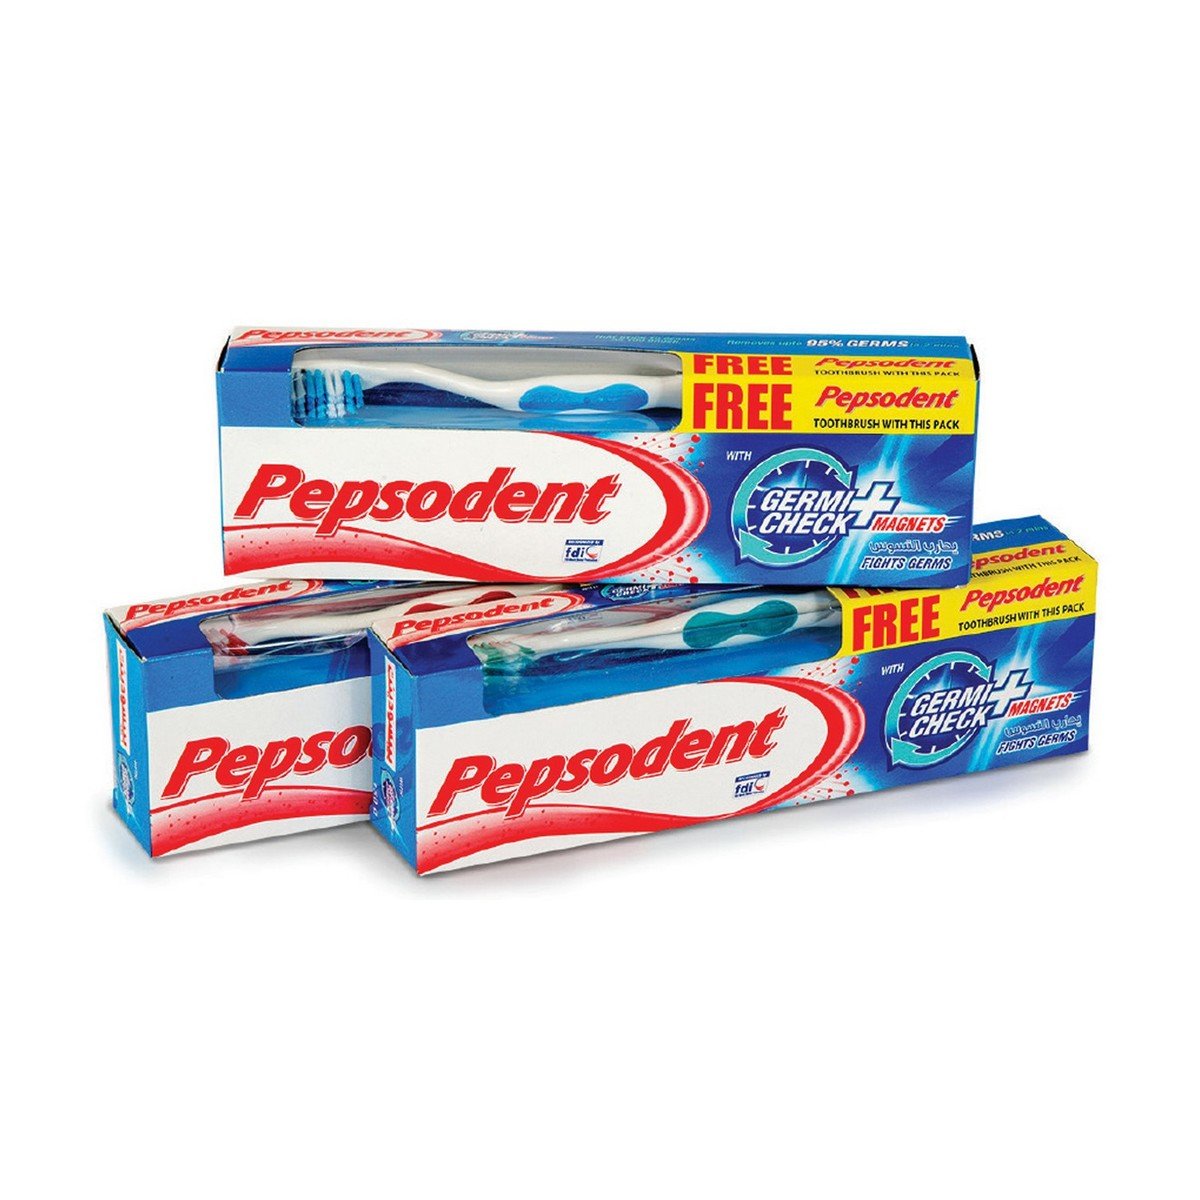 Pepsodent Toothpaste Germi Check 3 x 150g + Toothbrush